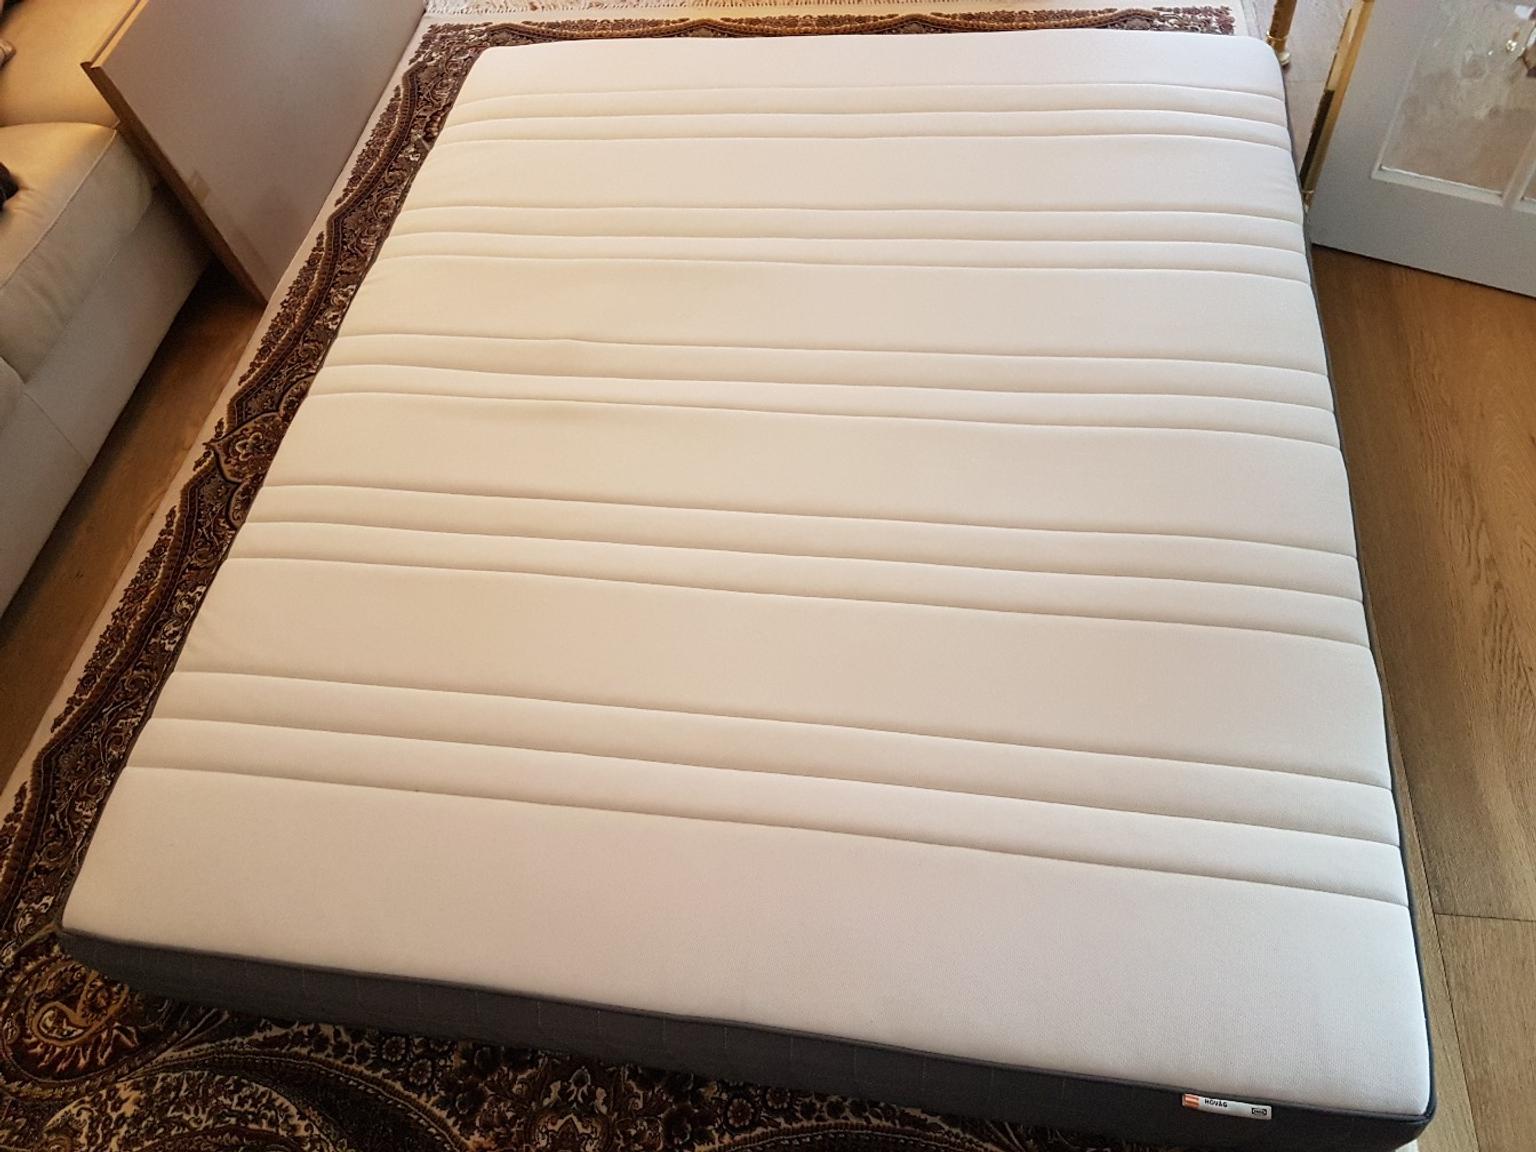 hovag king size mattress